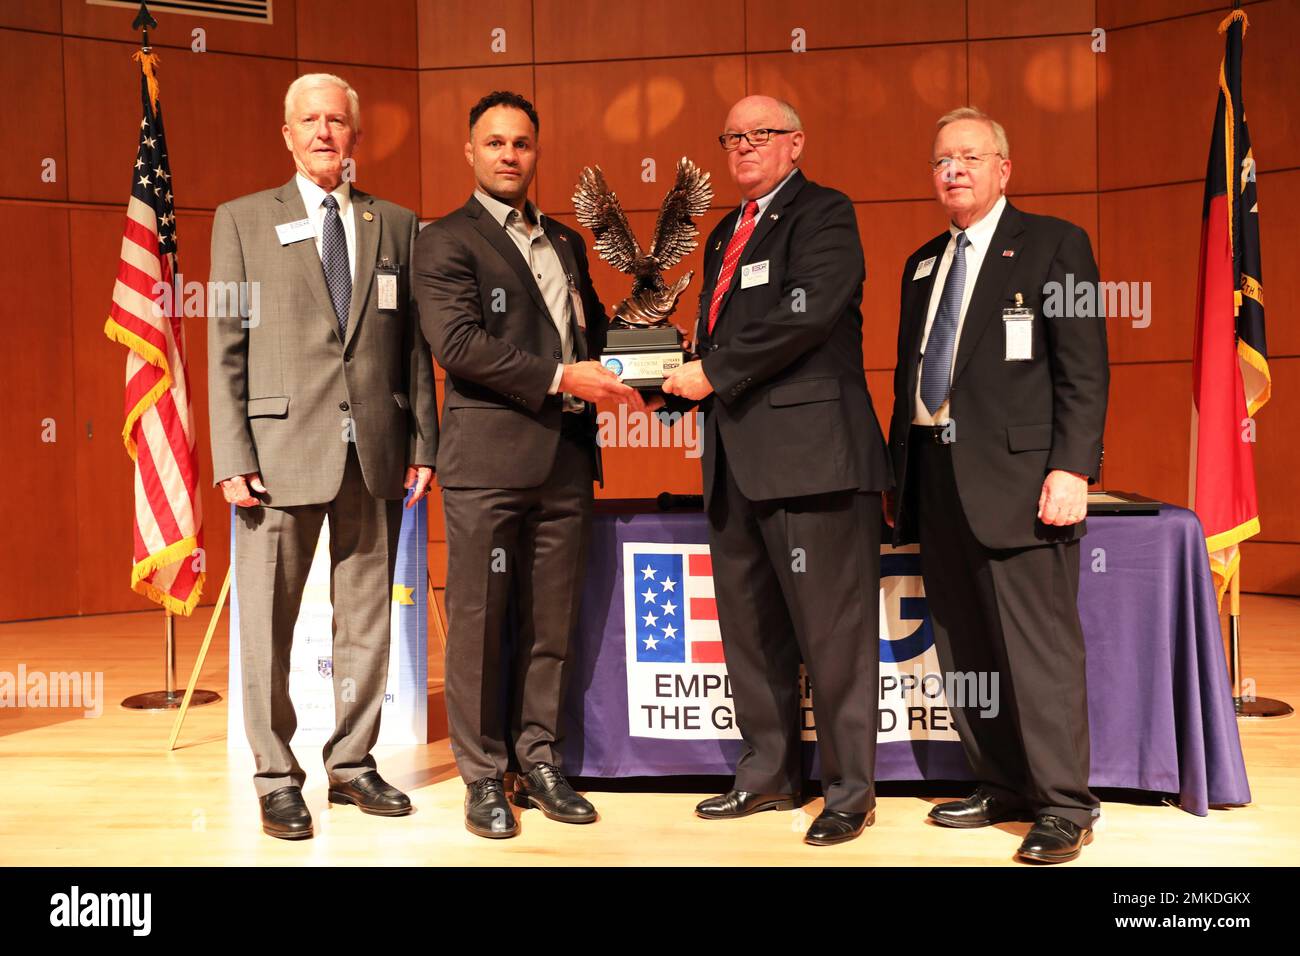 Iwan Clontz (center right), North Carolina Employer Support of the Guard and Reserve State Chairman, Ron Bogle (far left), ESGR National Chairman, and Ed Hamilton (far right), NC-ESGR Vice Chairman, congratulate Josh Koshcheck (Center left), Chief Executive Officer of Check Defense and recipient of the Secretary of Defense Freedom Award, during a ceremony at Joint Forces Headquarters, Raleigh, North Carolina, Sept. 8, 2022. The Freedom Award is the highest recognition given by the United States Government to employers for their outstanding support of employees serving in the Guard and Reserve. Stock Photo